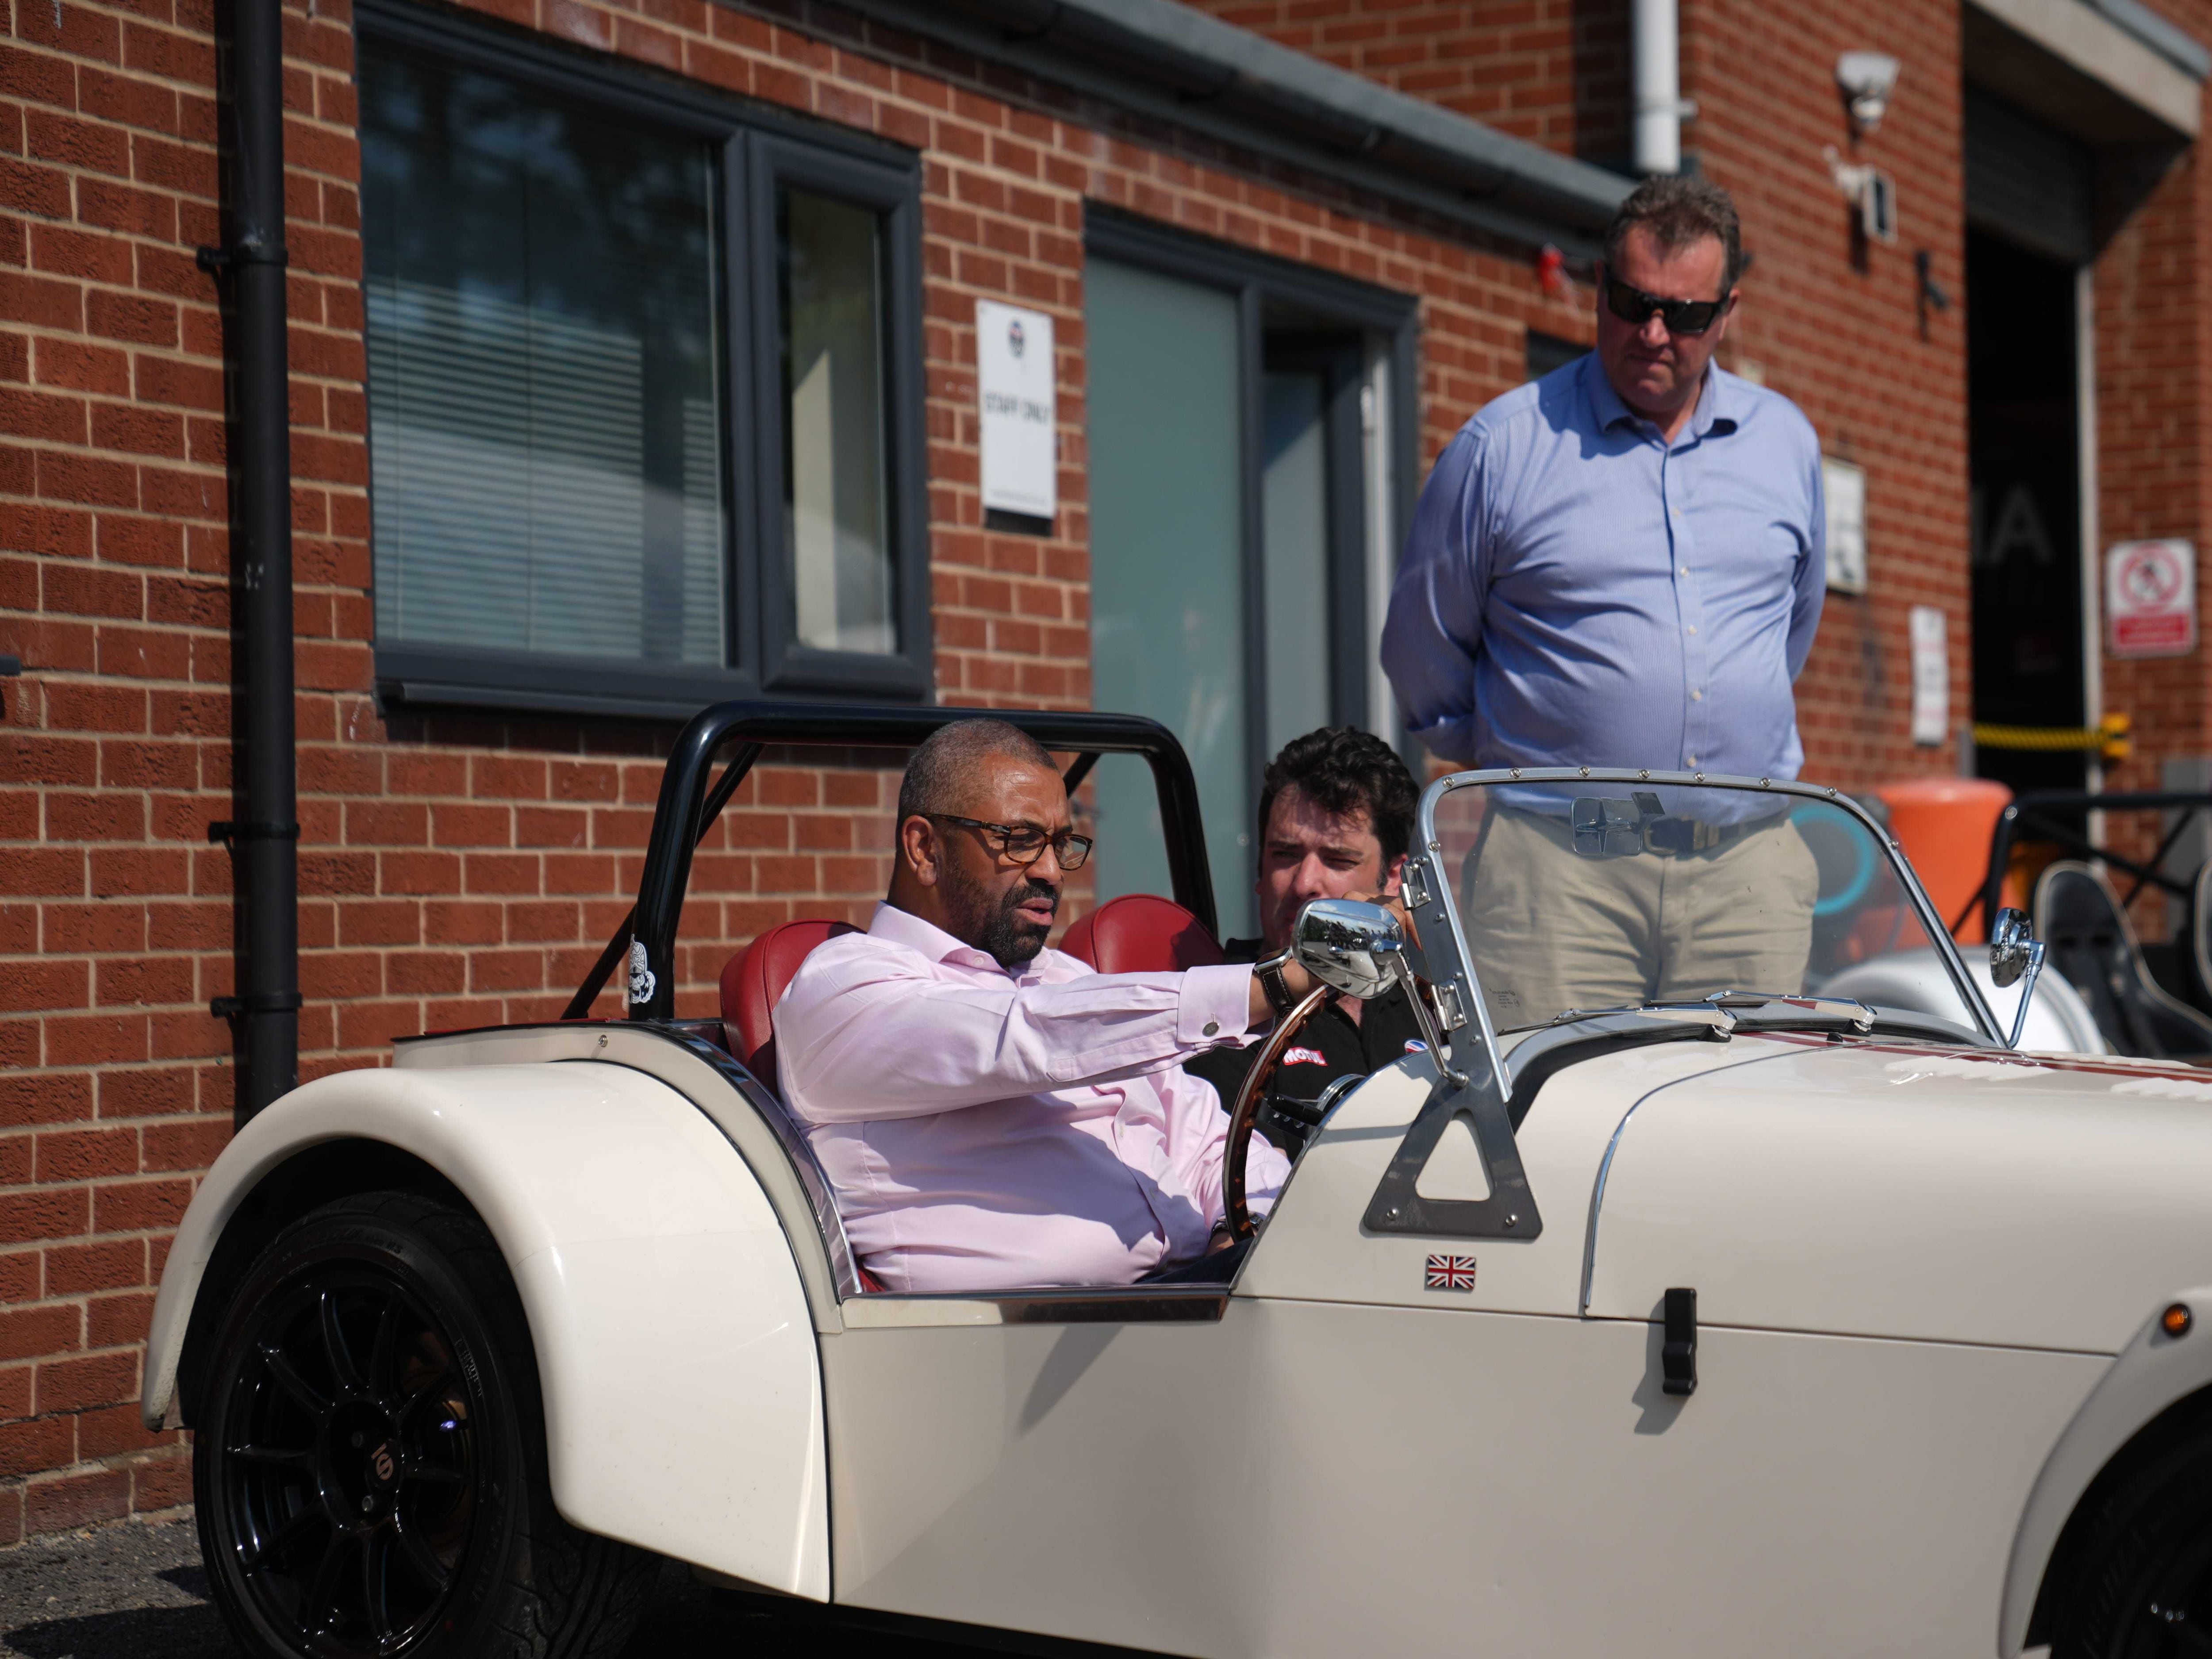 James Cleverly eyes up bespoke sports car and visits pub on Tory campaign trail